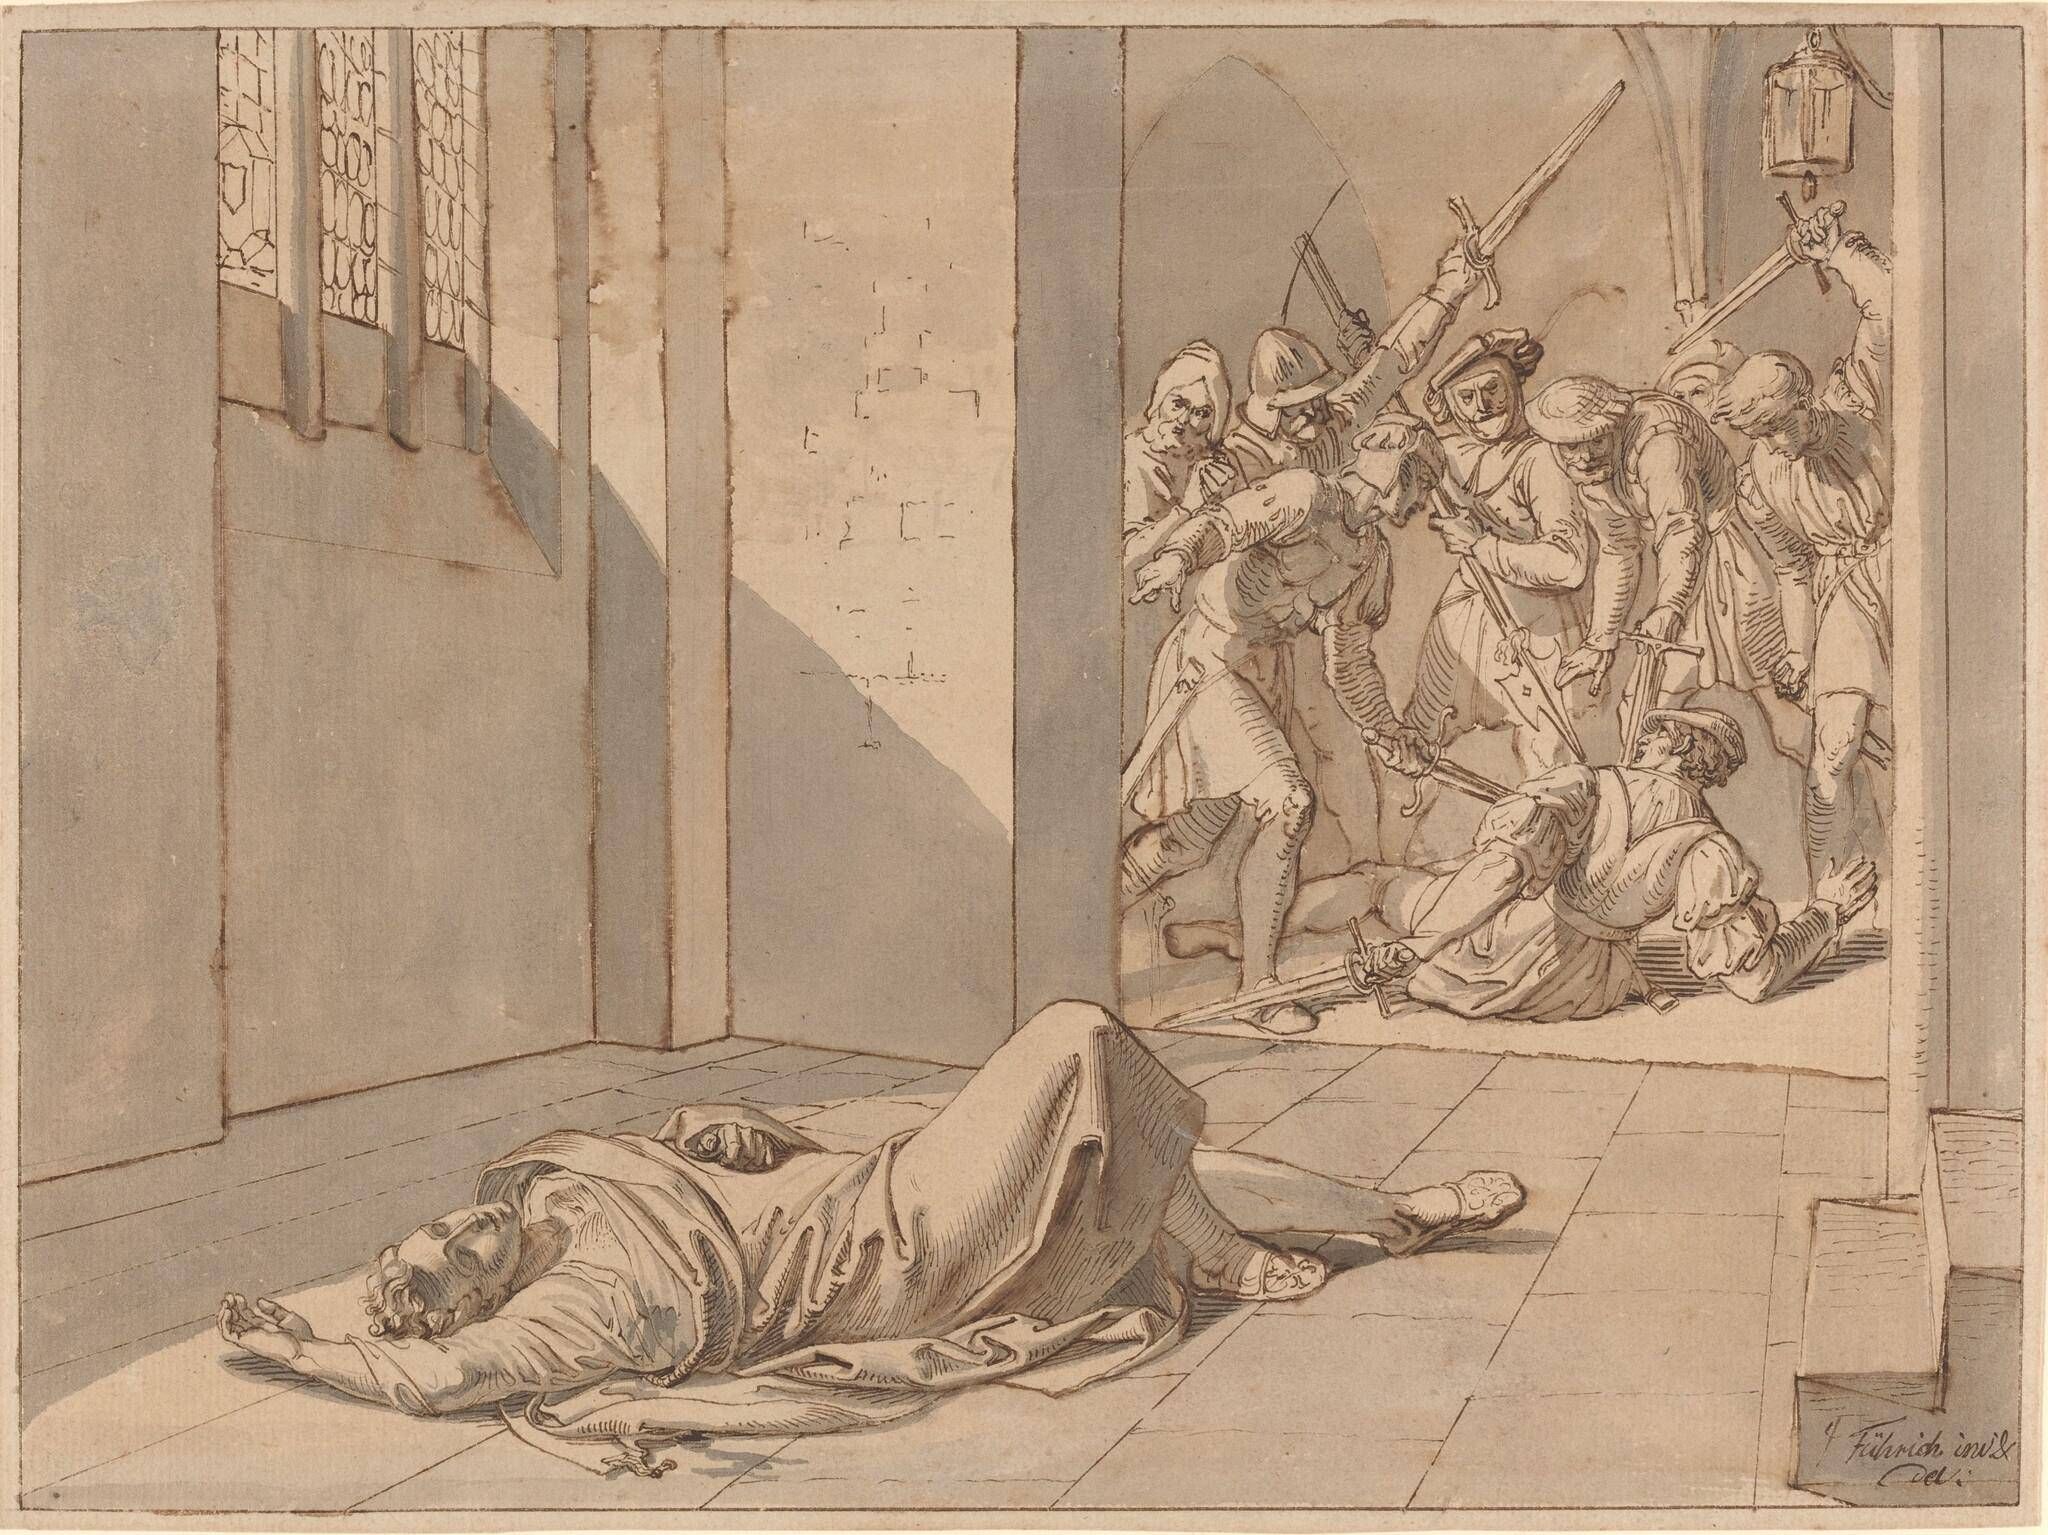 The Assassination of King Wenzel III